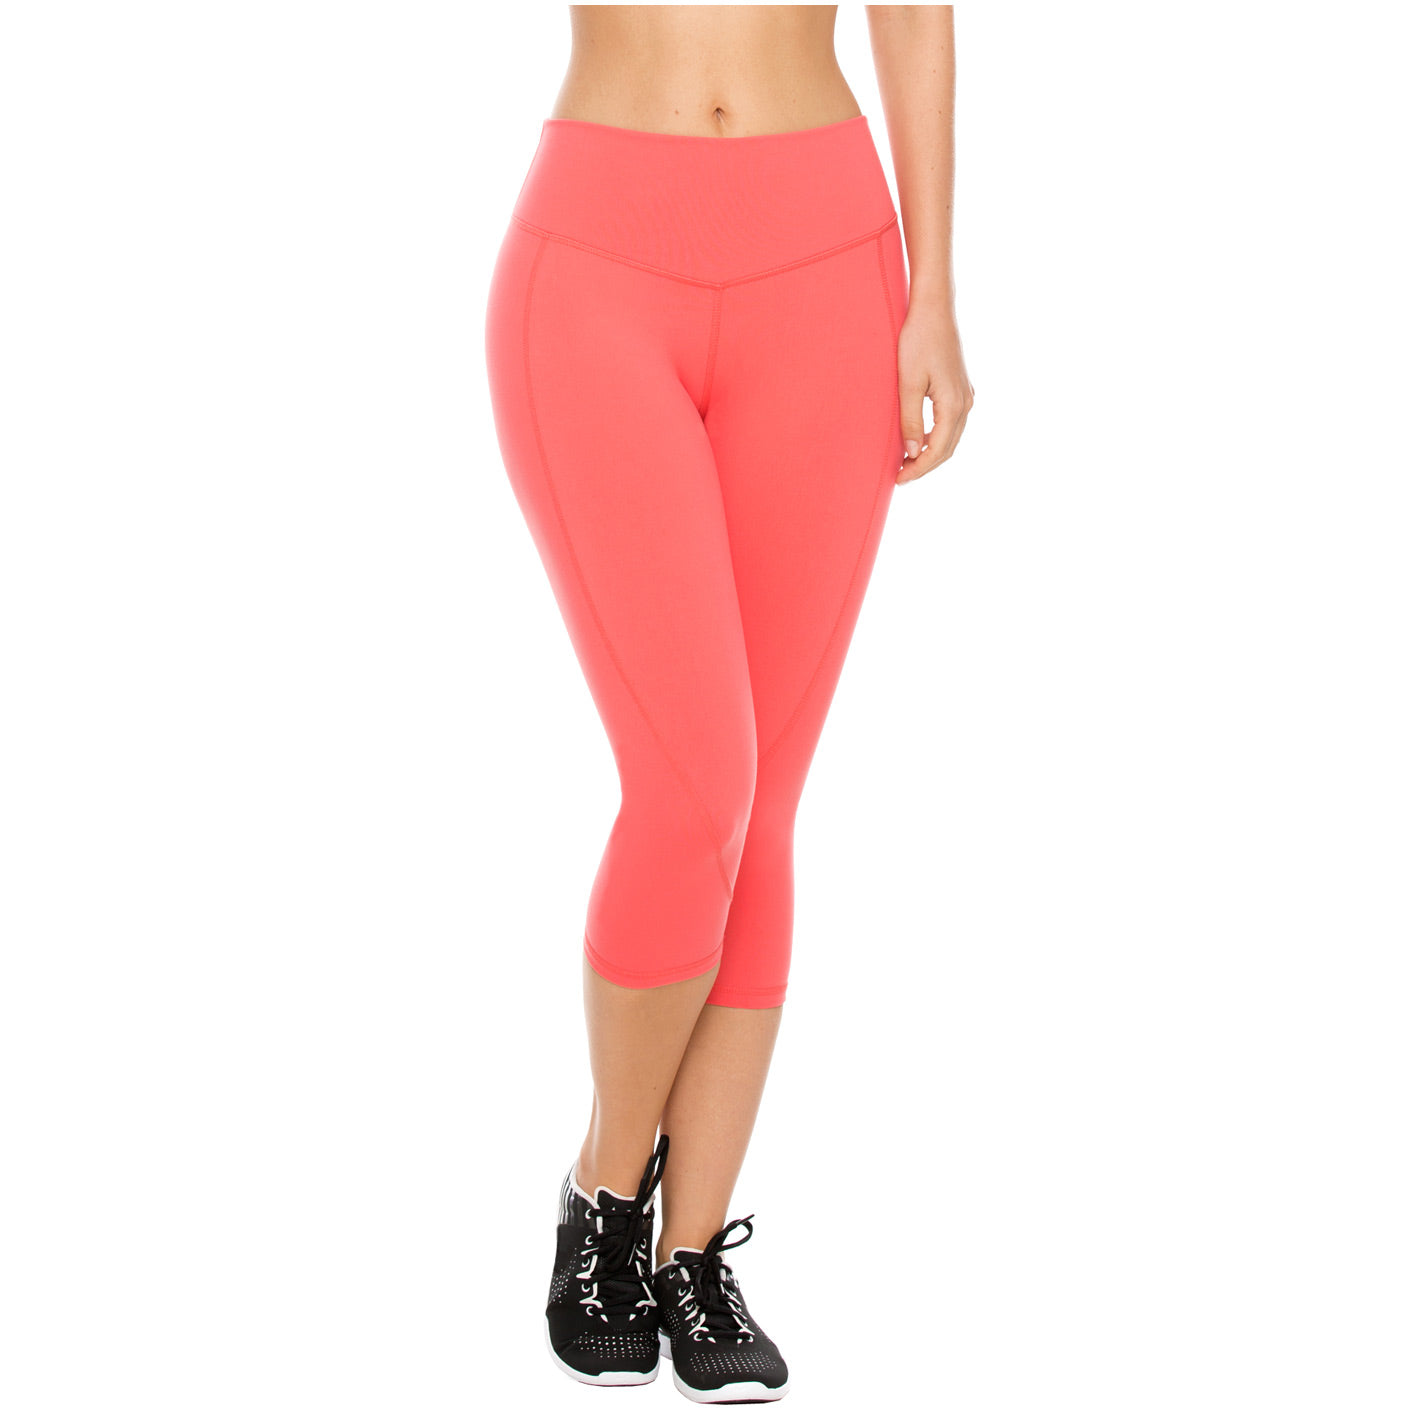 Sports Factory  SF 34 Tight Fit Leggings Cycling Football Gym   Outdoor Multi Sports Women Pink Capri  Buy Sports Factory  SF 34 Tight  Fit Leggings Cycling Football Gym 